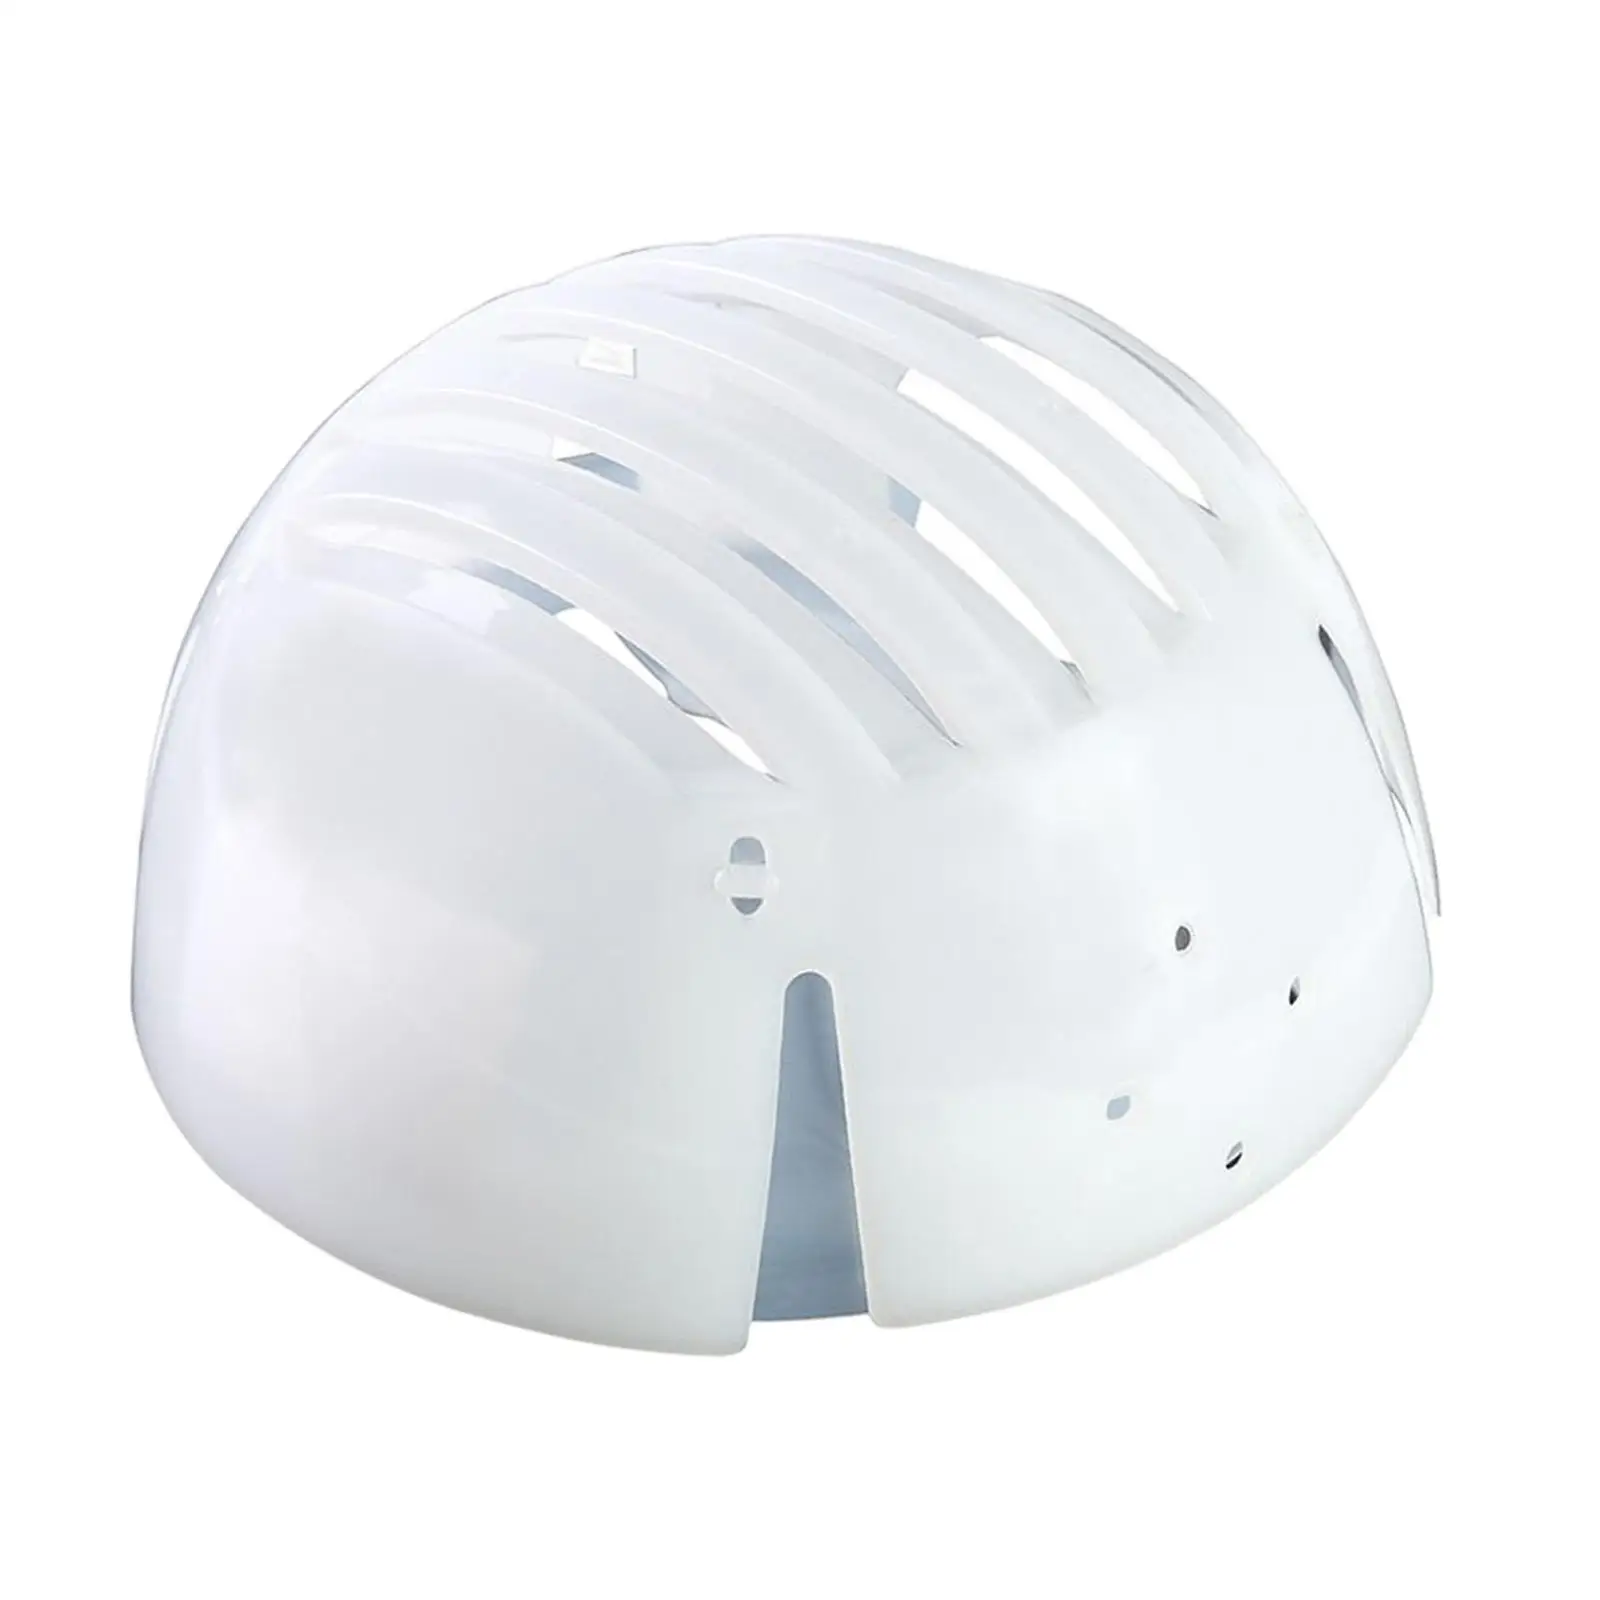 Safety Helmet Protective Hat Lining Durable Bump Cap Insert for Outdoor Baseball Hat